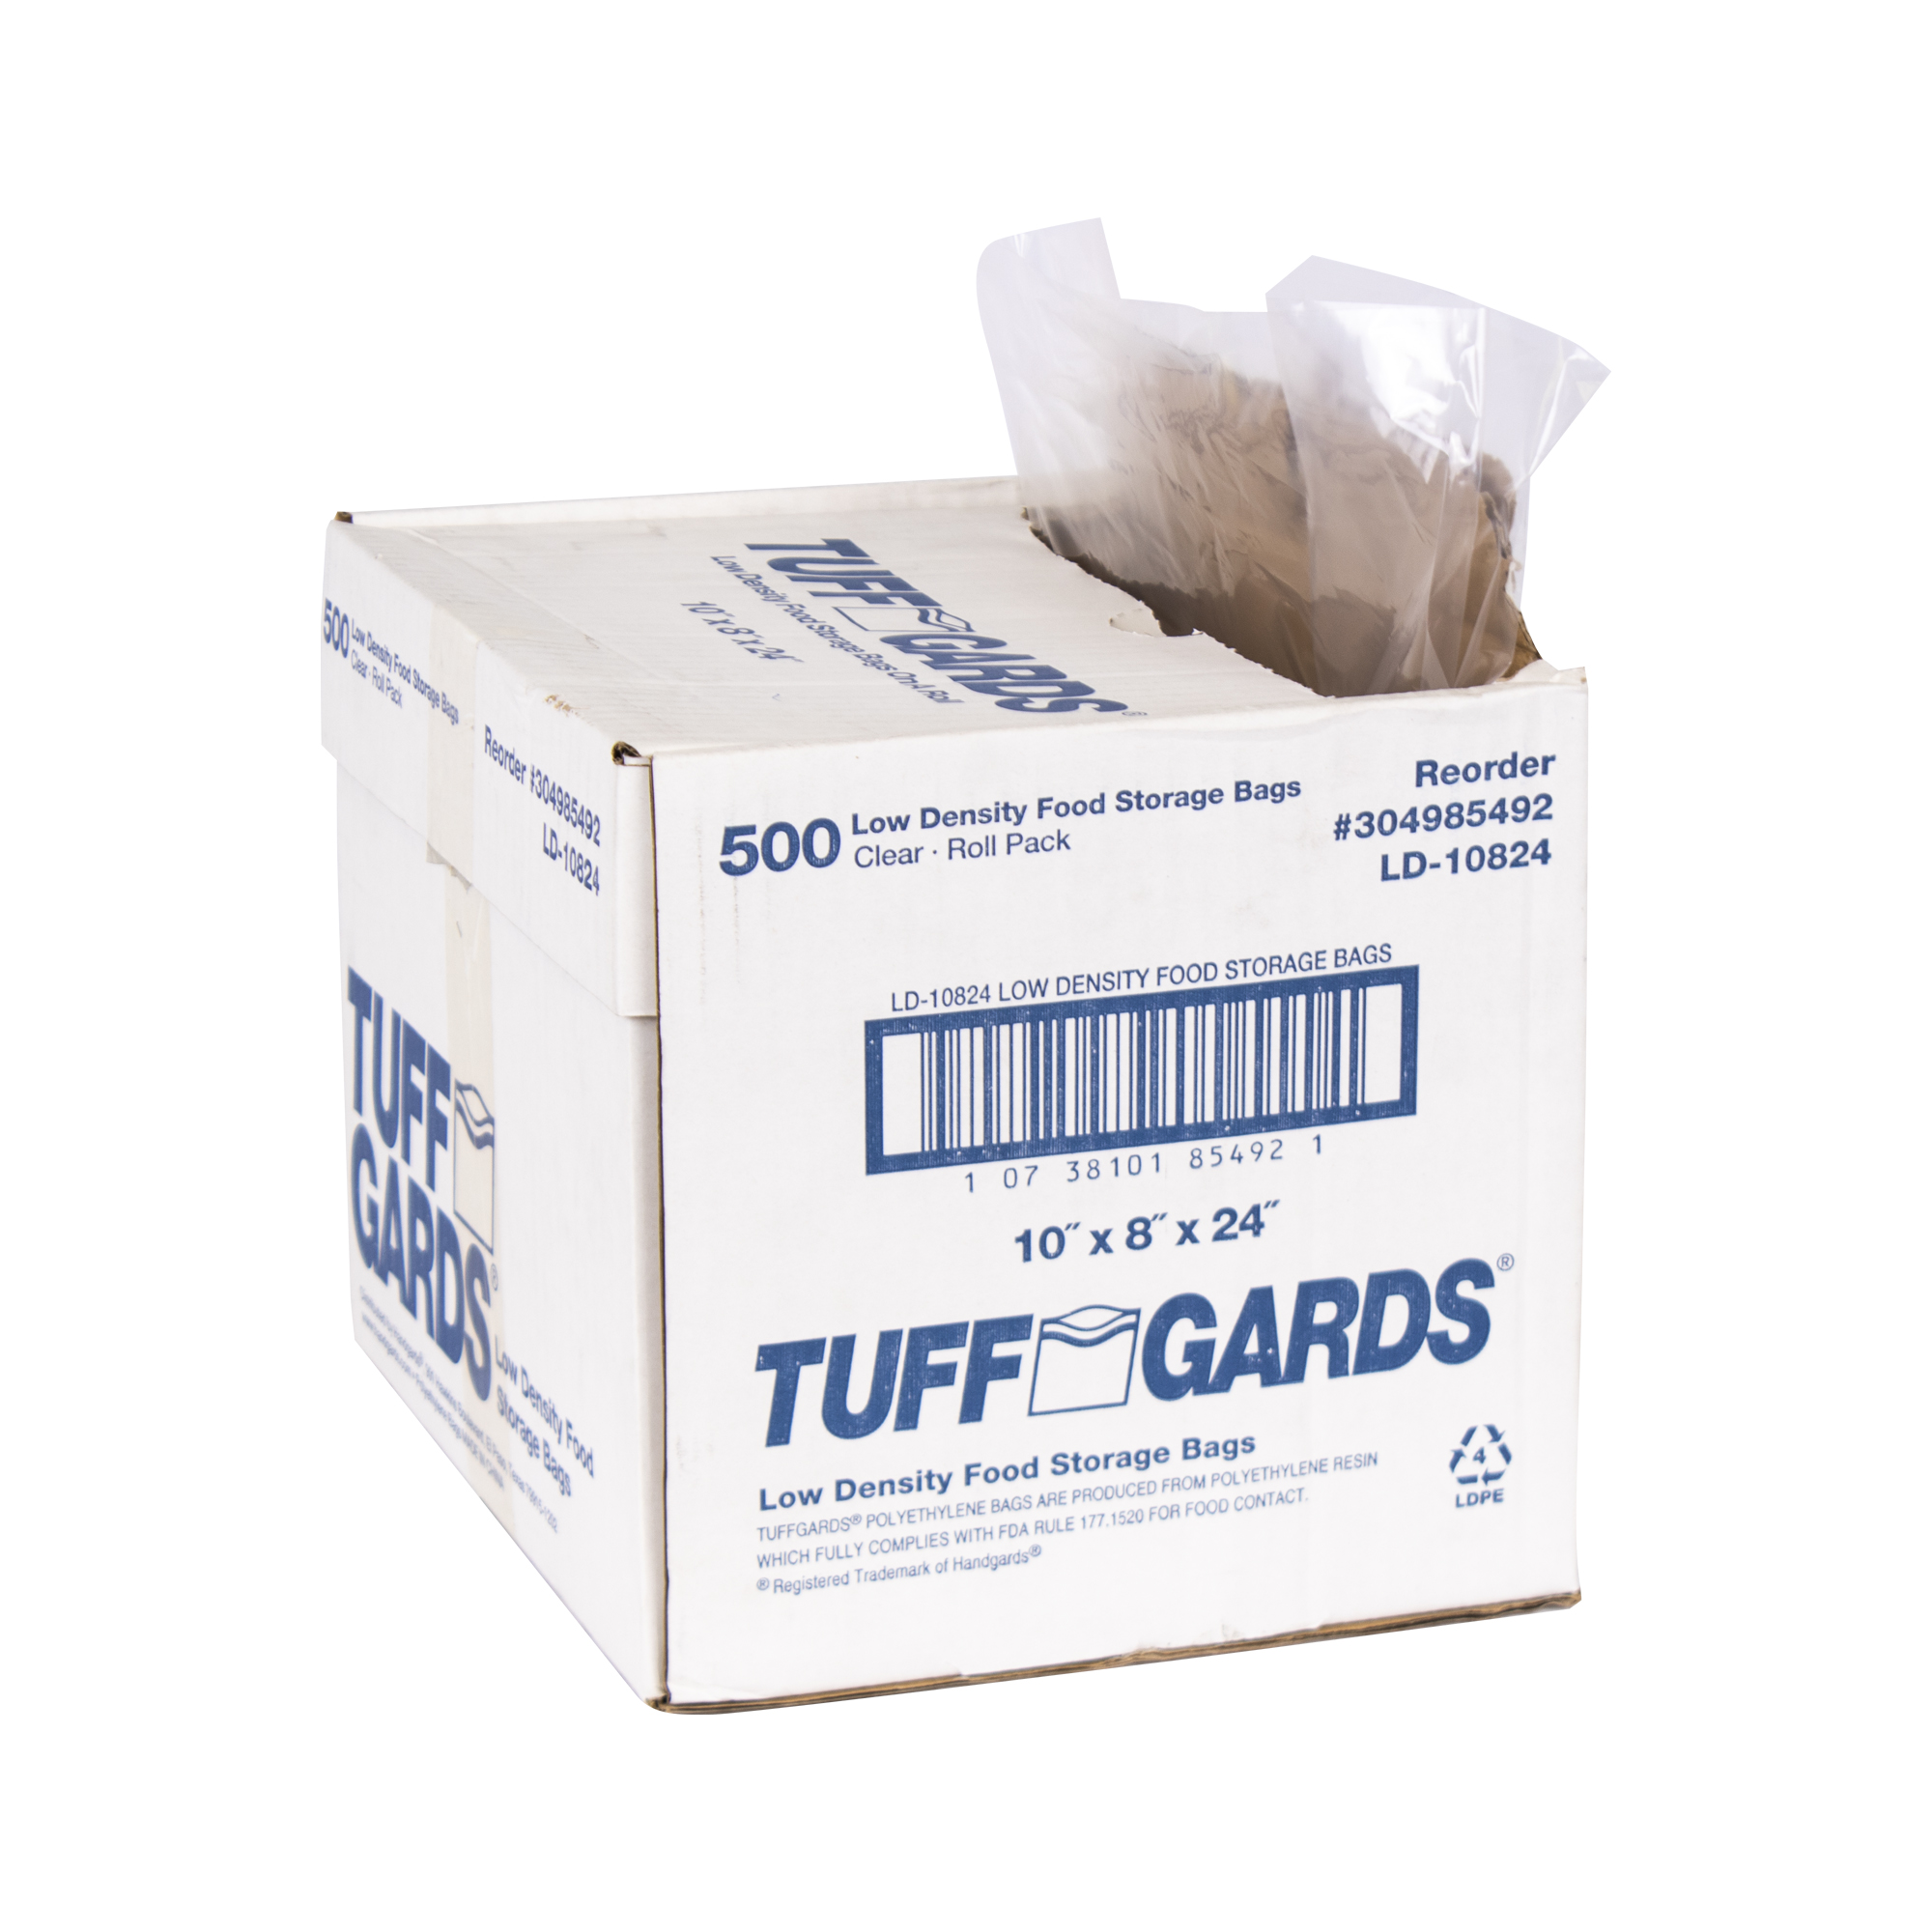 http://handgards.com/wp-content/uploads/2020/10/304985492-Tuffgards%C2%AE-Low-Density-Disposable-Food-Storage-Bags-%E2%80%93-LD10824-%E2%80%93-10%E2%80%B3-x-8%E2%80%B3-x-24%E2%80%B3-Open-Case.jpg